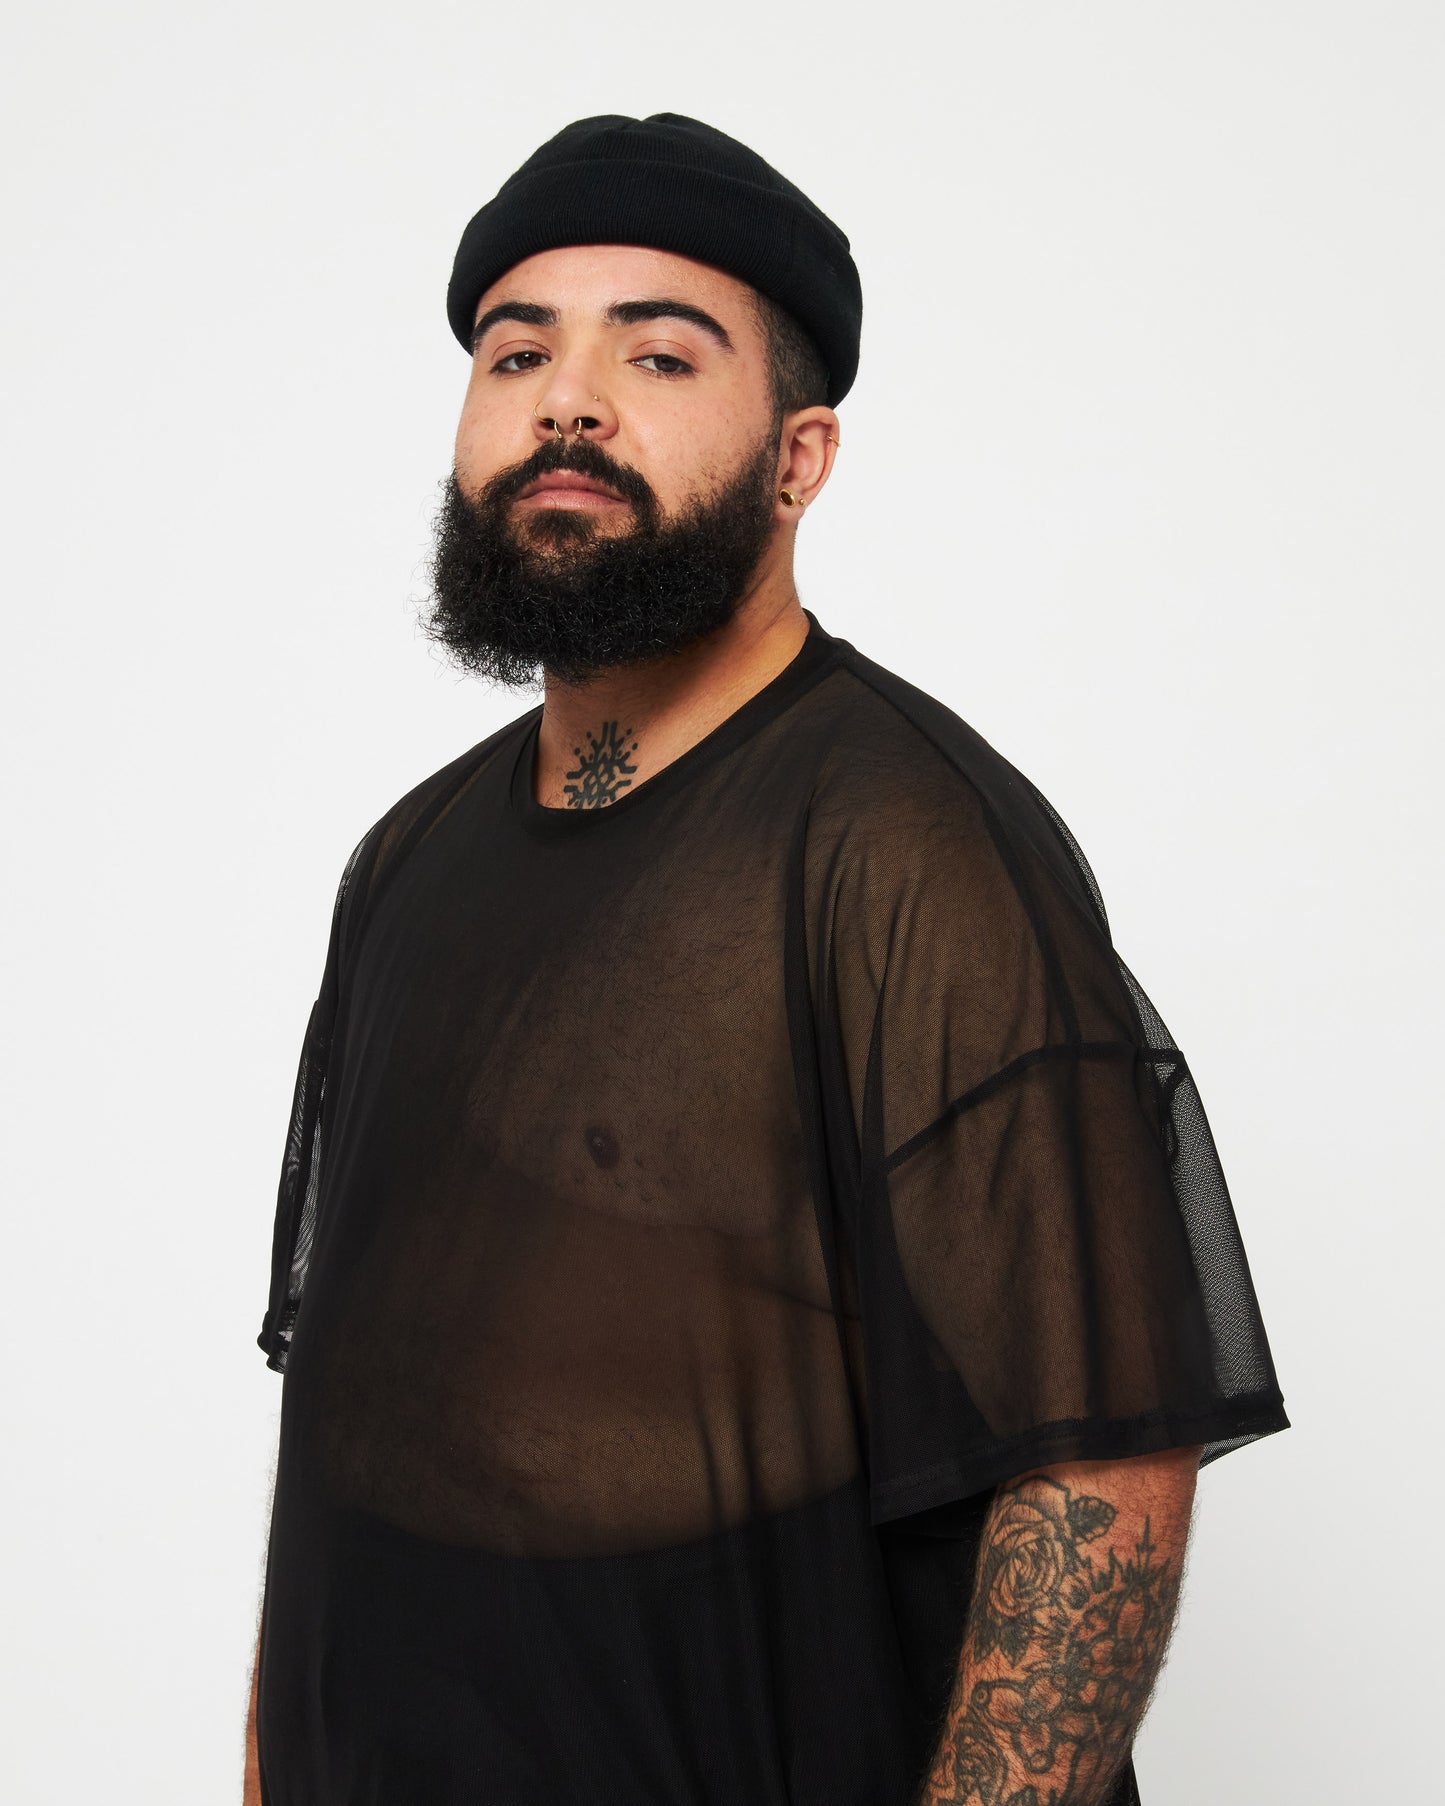 OVERSIZED T-SHIRT / ALL YOU CAN EAT / MESH BLACK